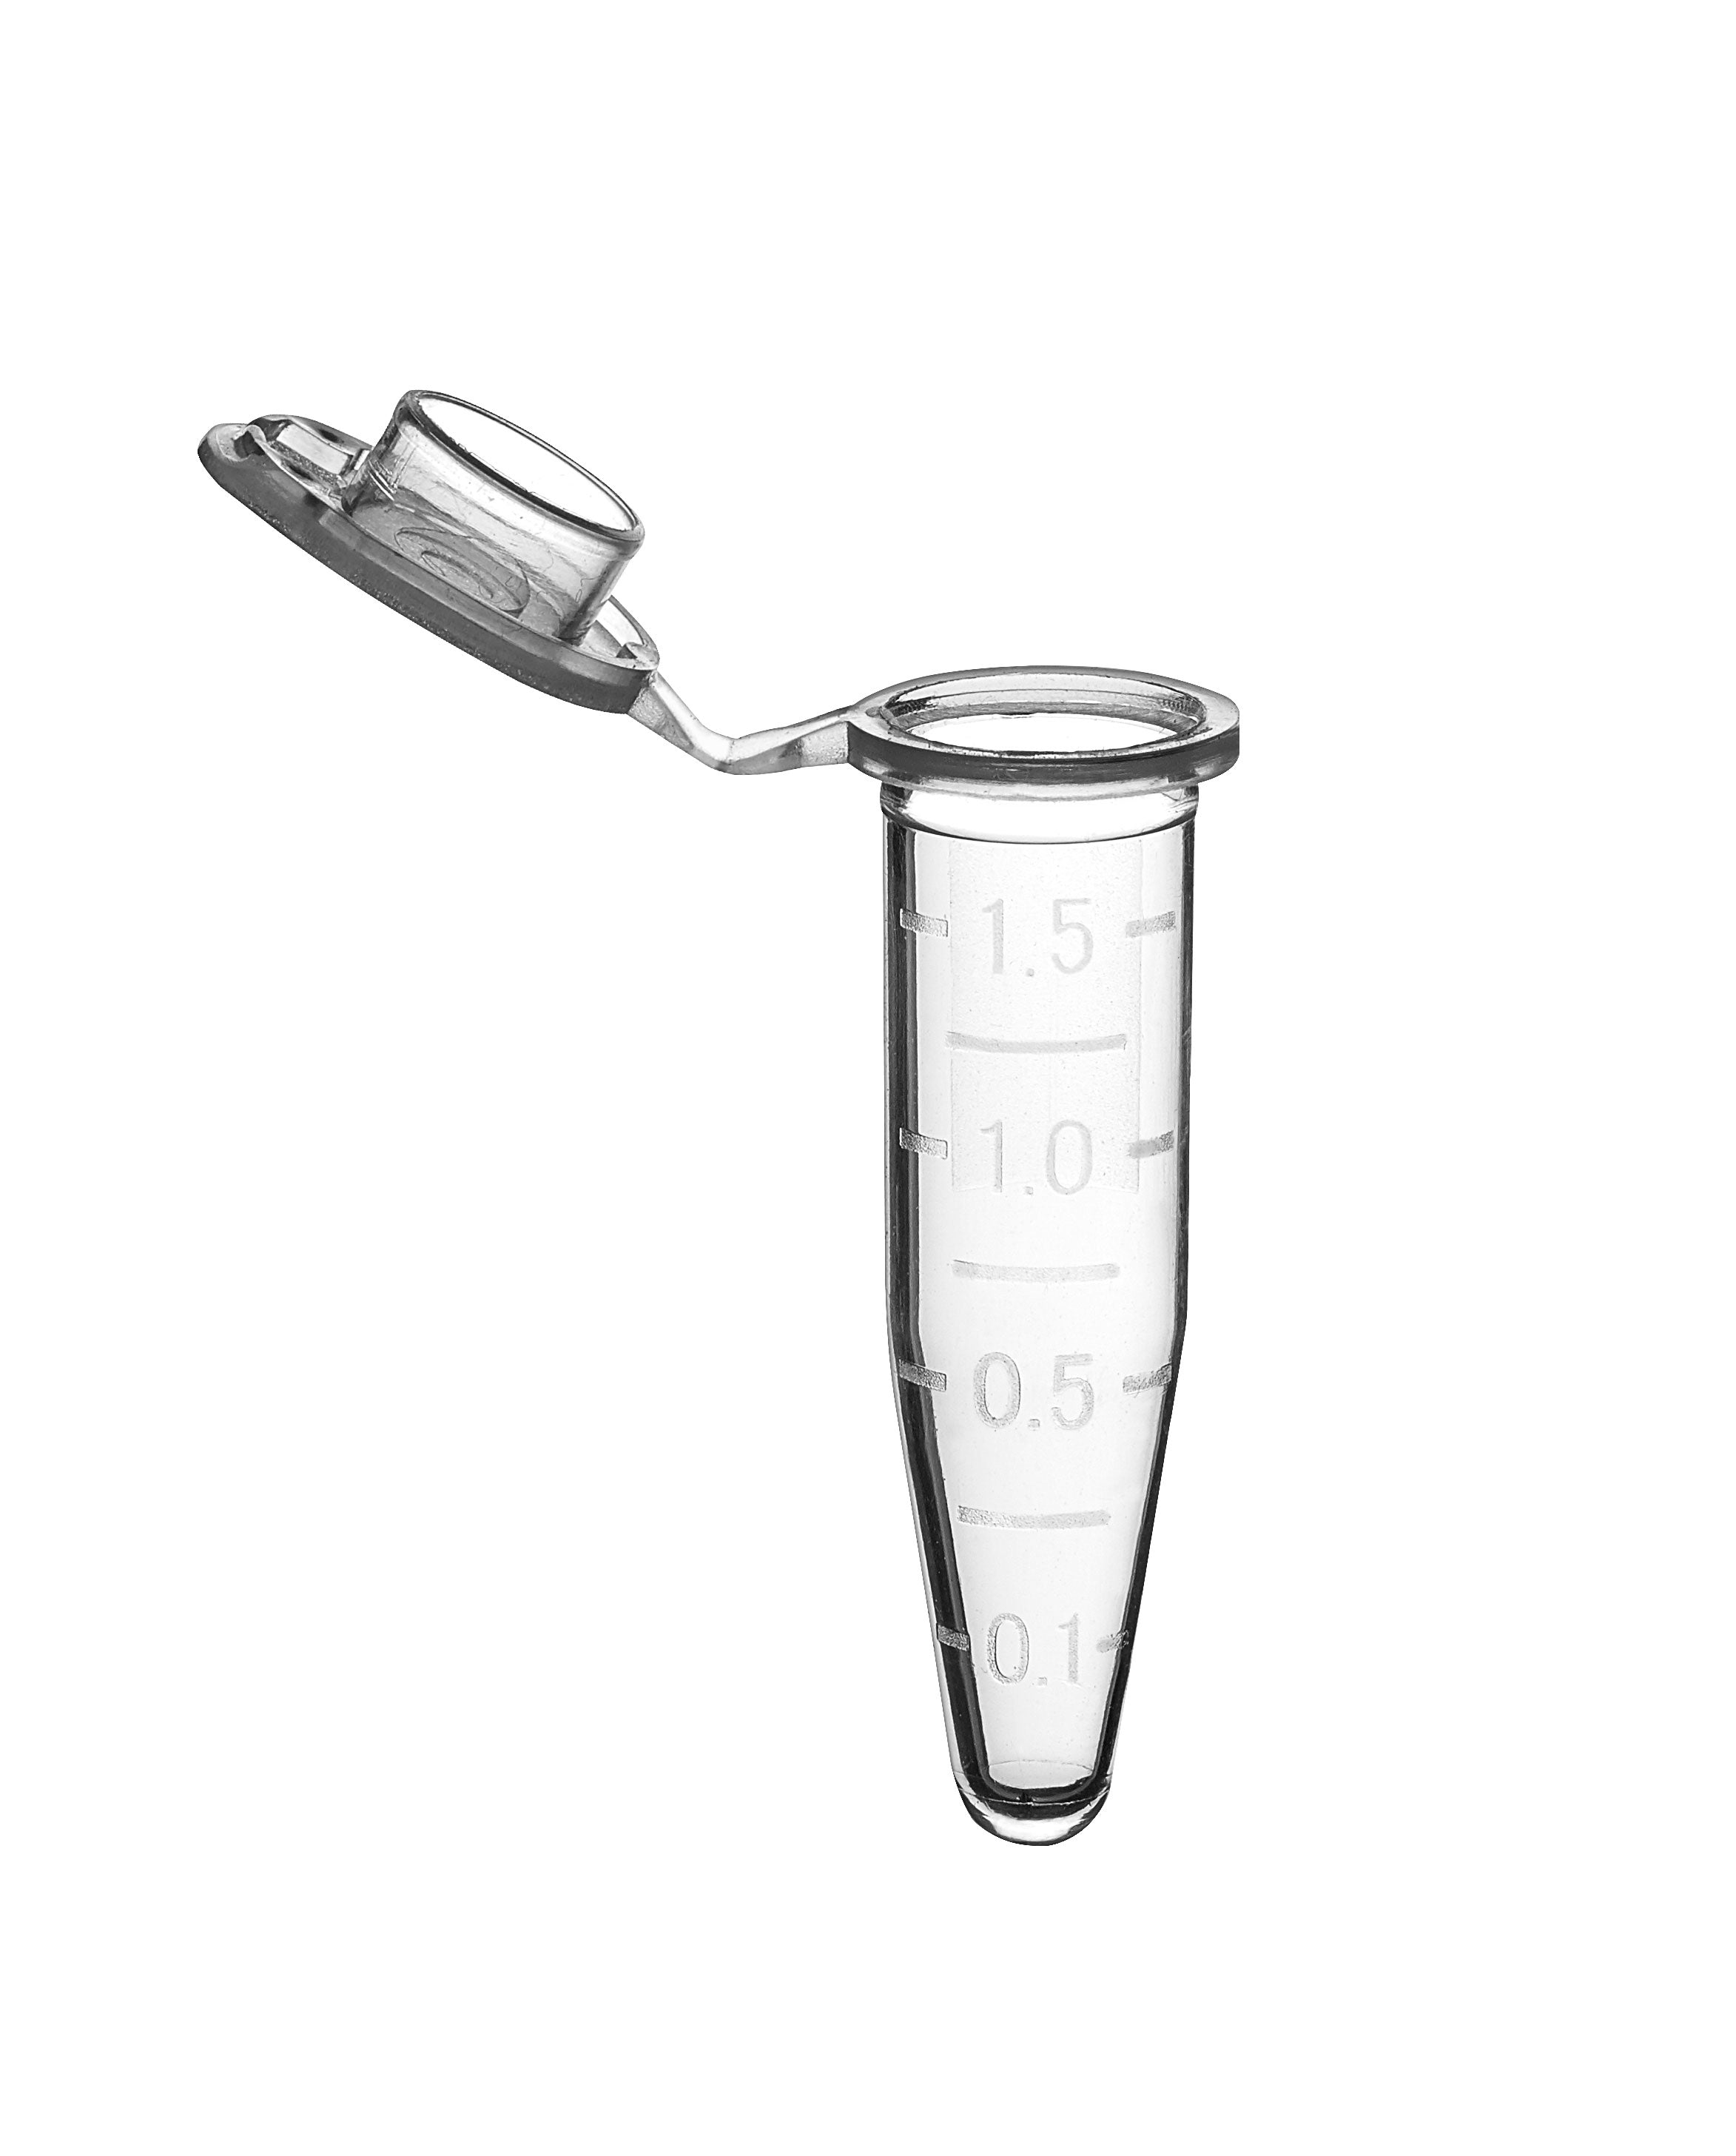 MTC Bio C2000, SureSeal Microcentrifuge Tube with Cap, 1.5ml, Clear, Sterile, with Self-Standing Bag & Stop-Pops, 500/pk